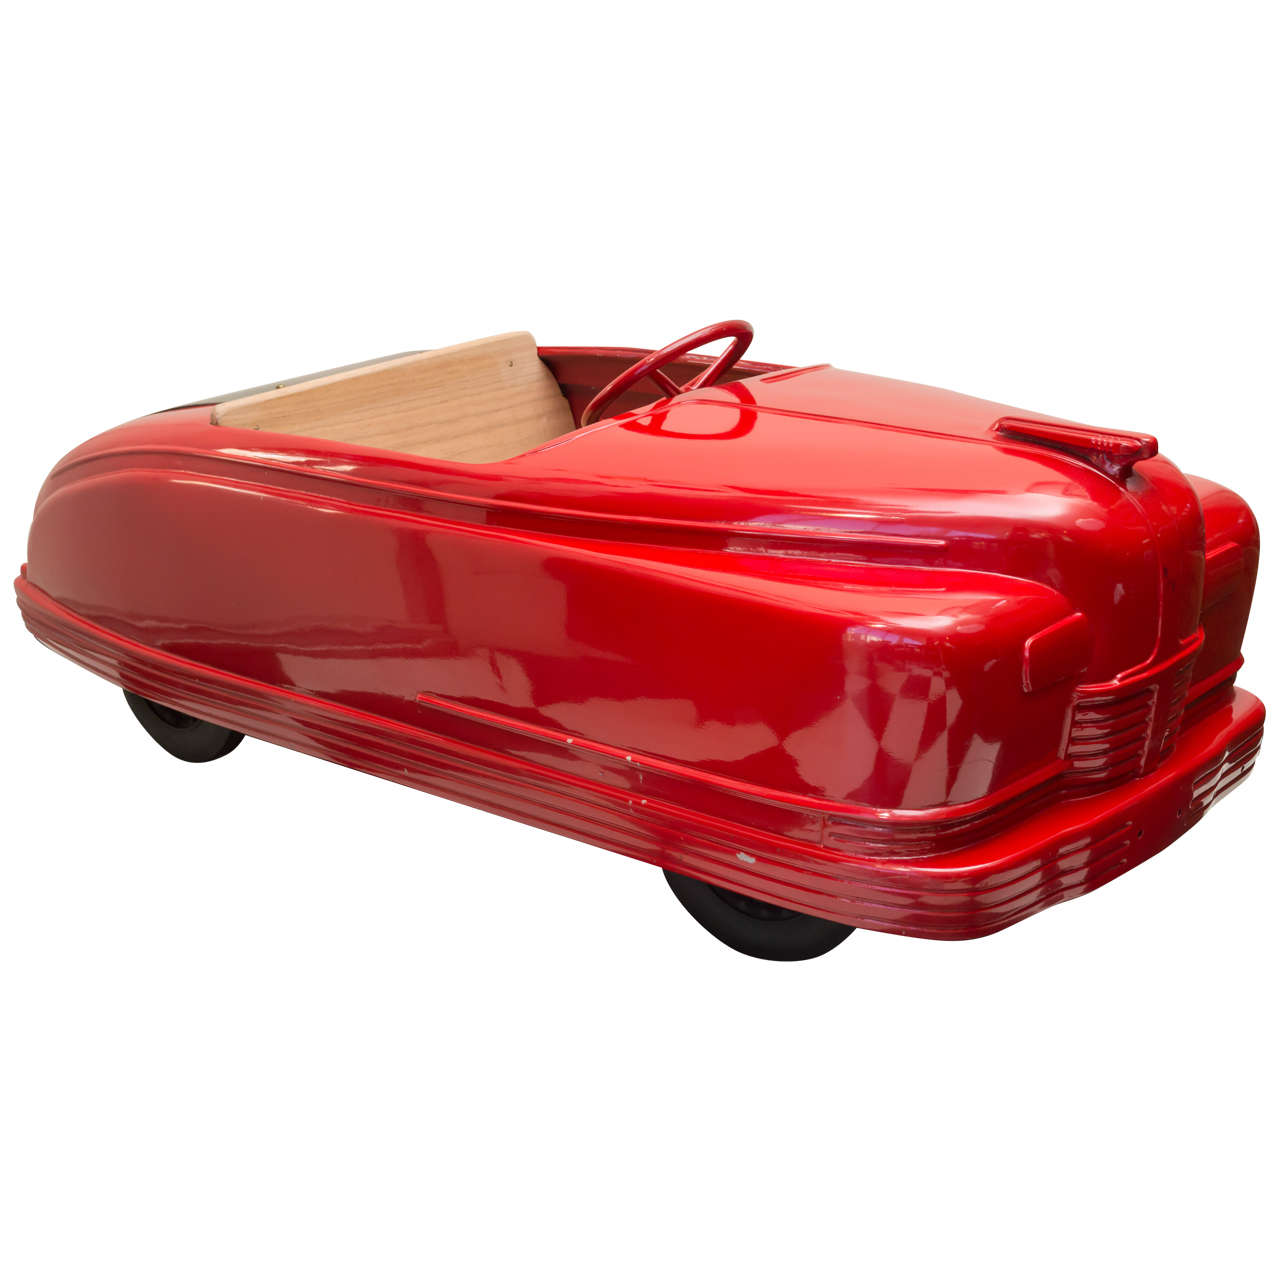 Late 1940s American Amusement Park Car, "Little Red Convertible" For Sale